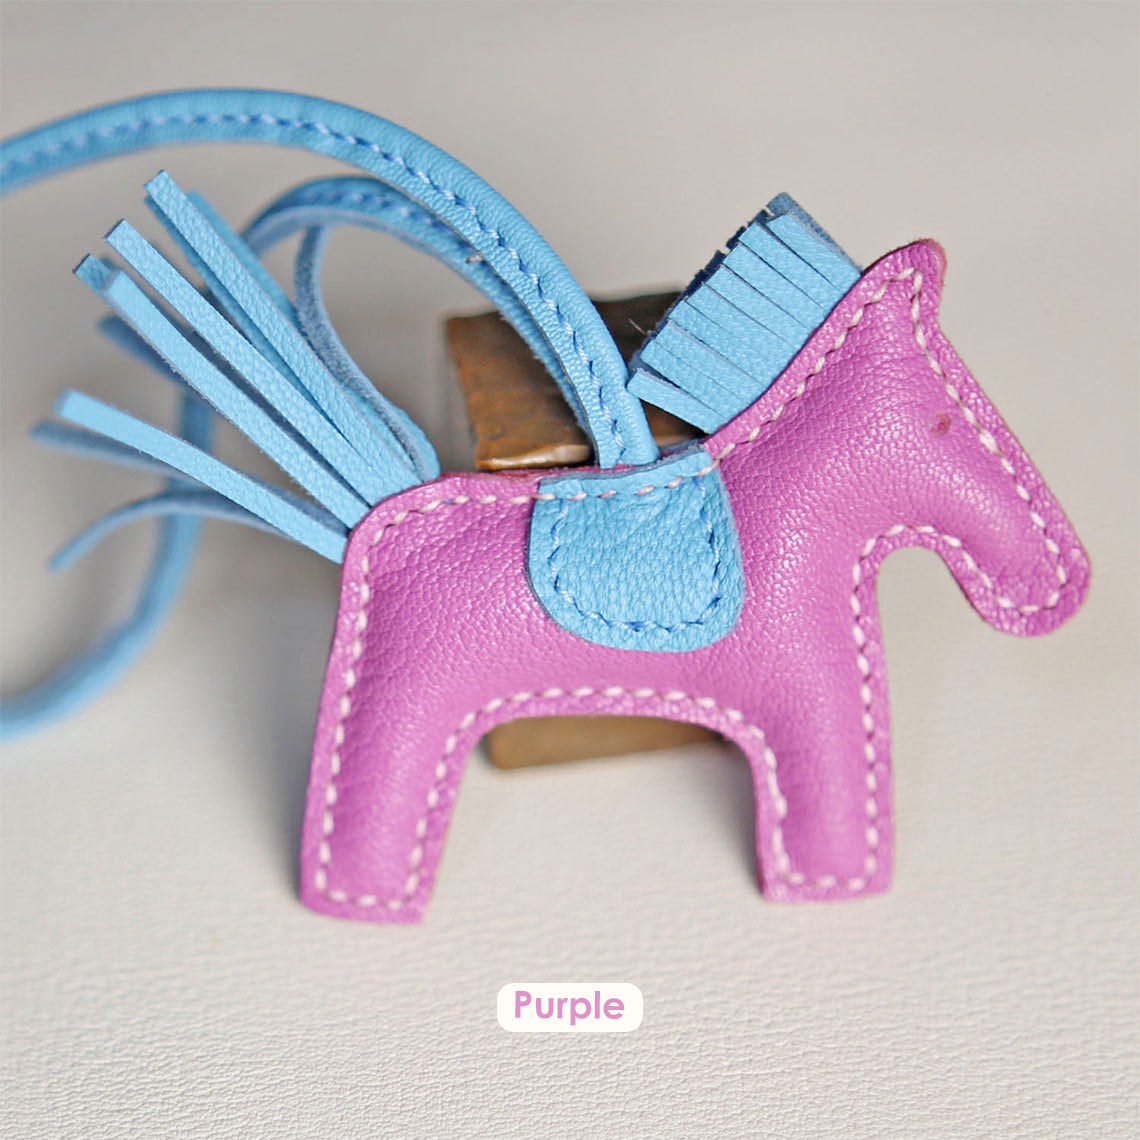 Pink & Blue Leather Rodeo Horse Bag Charm Keychain | Luxury Bag Accessories for Affordable Price - POPSEWING™